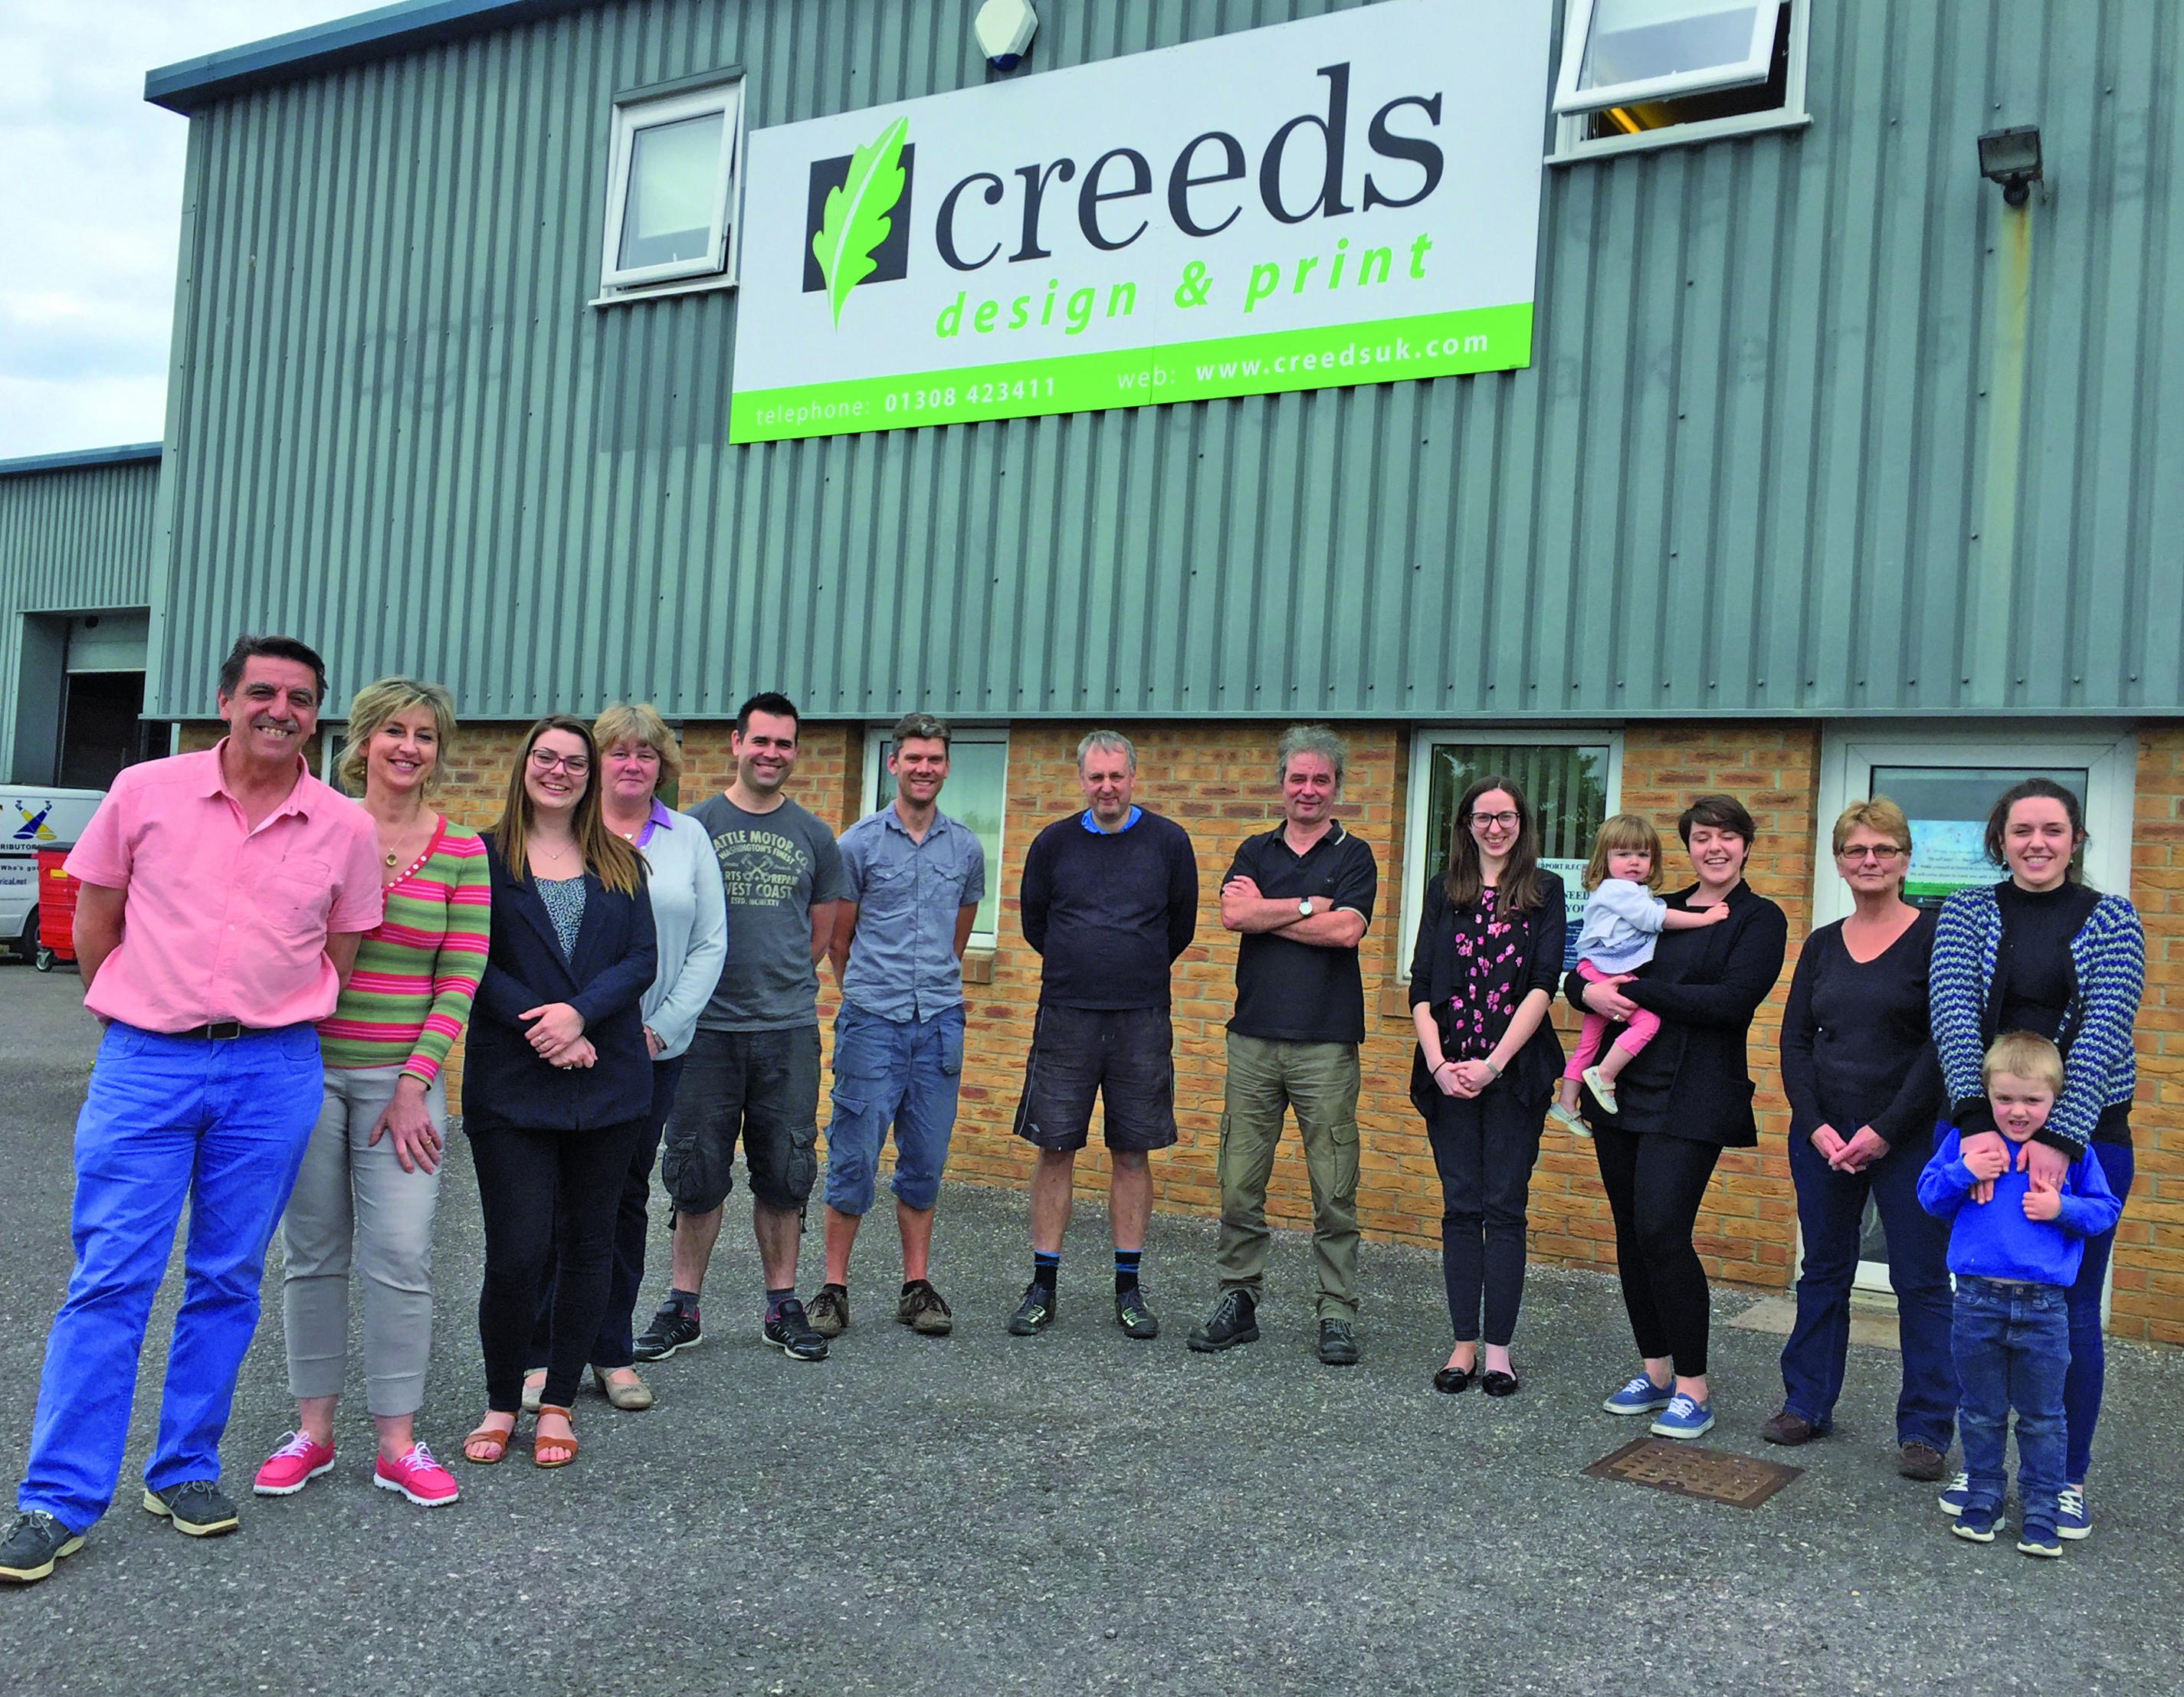 This year marks the 60th anniversary of Creeds Design & Print